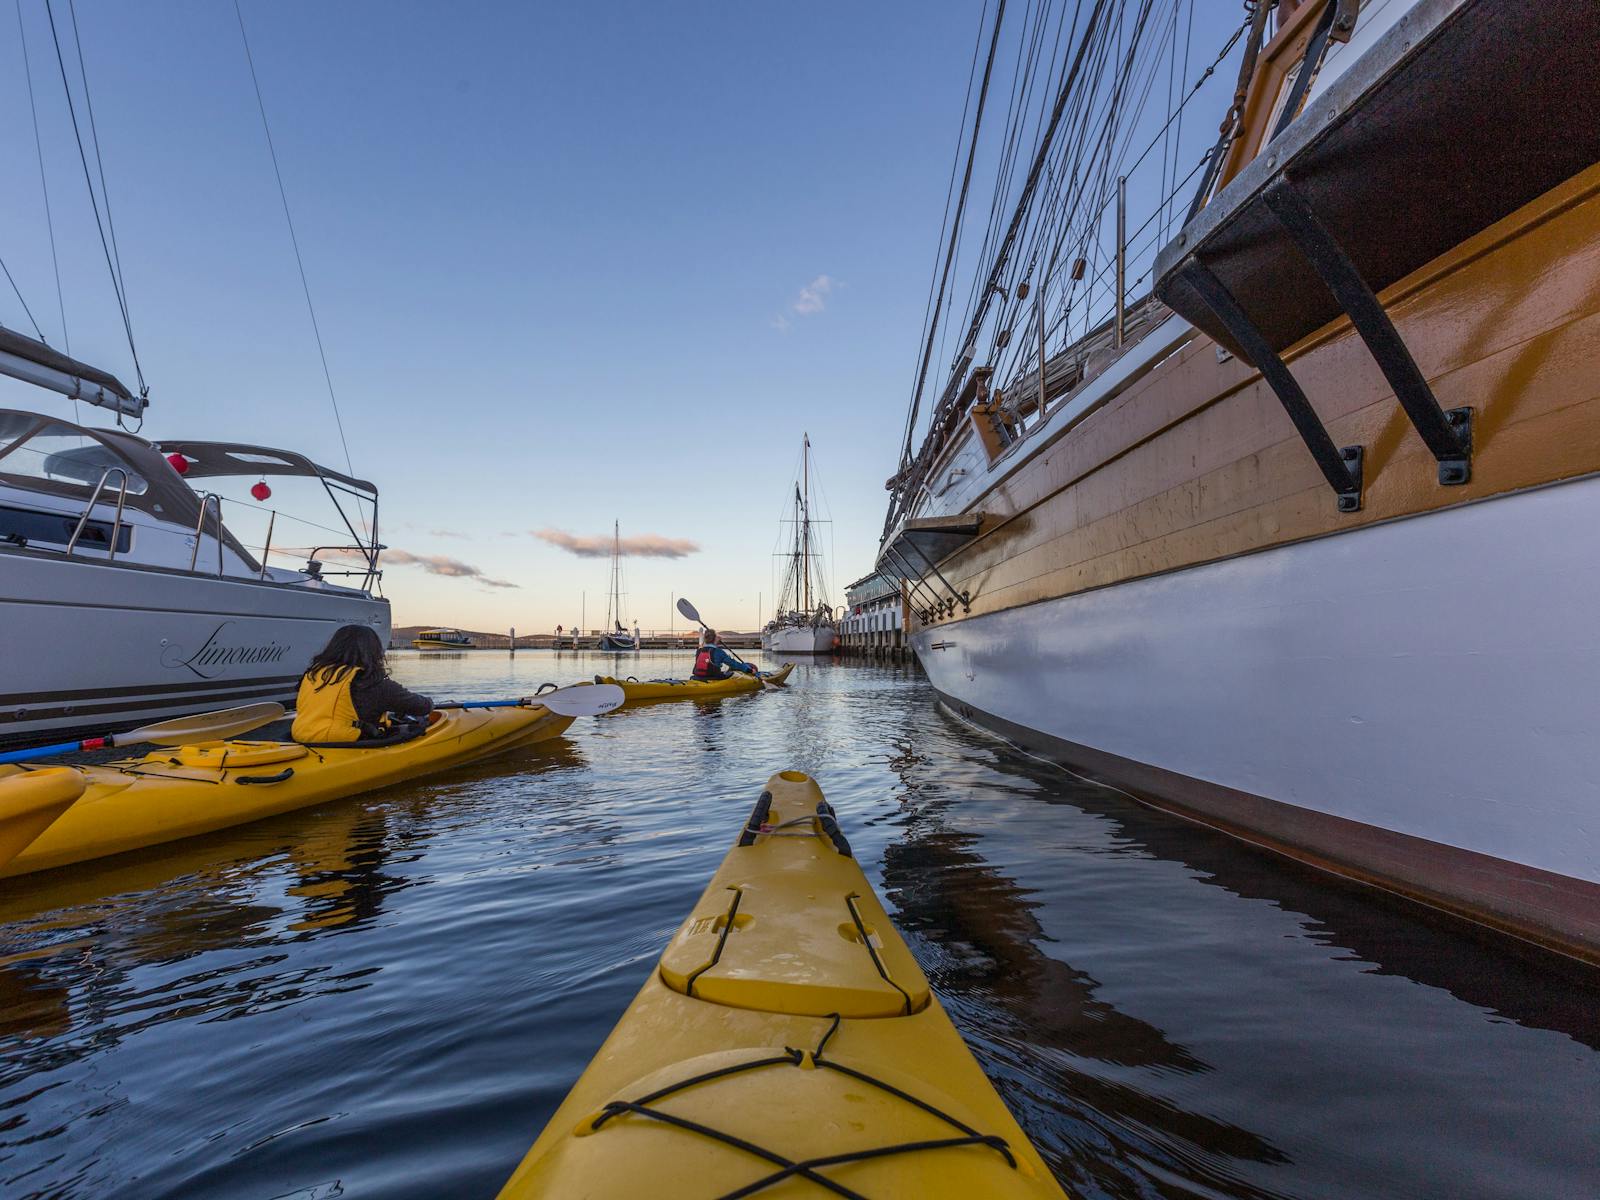 Kayakers paddling amongst the boats on the Hobart waterfront